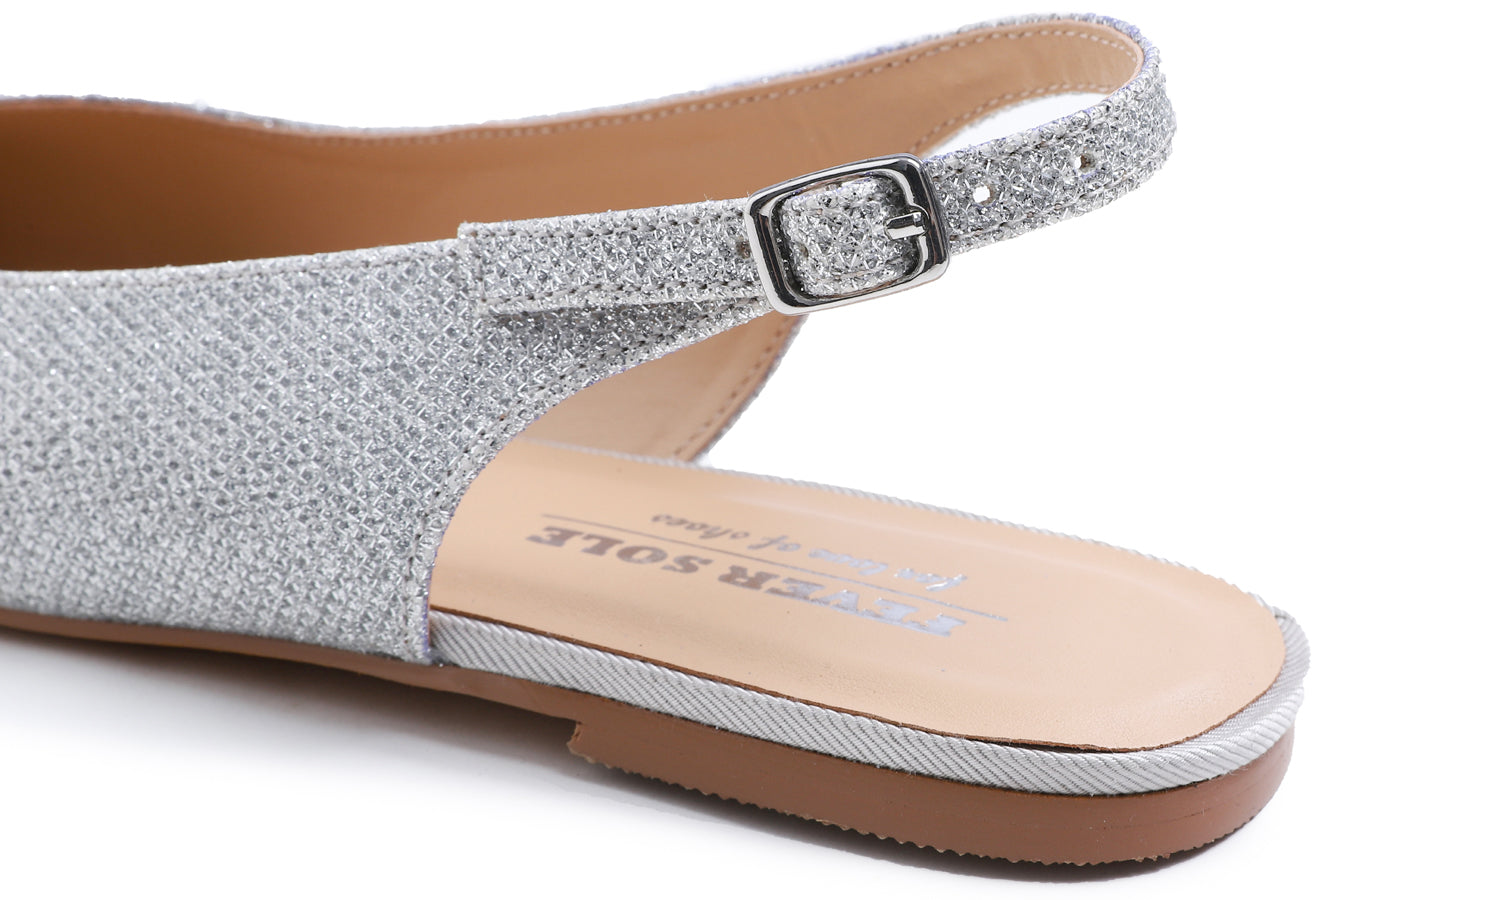 Feversole Pointed Toe Casual Slingback Flat Mules Women's Fashion Buckle Strap Slide Summer Slippers Silver Lurex